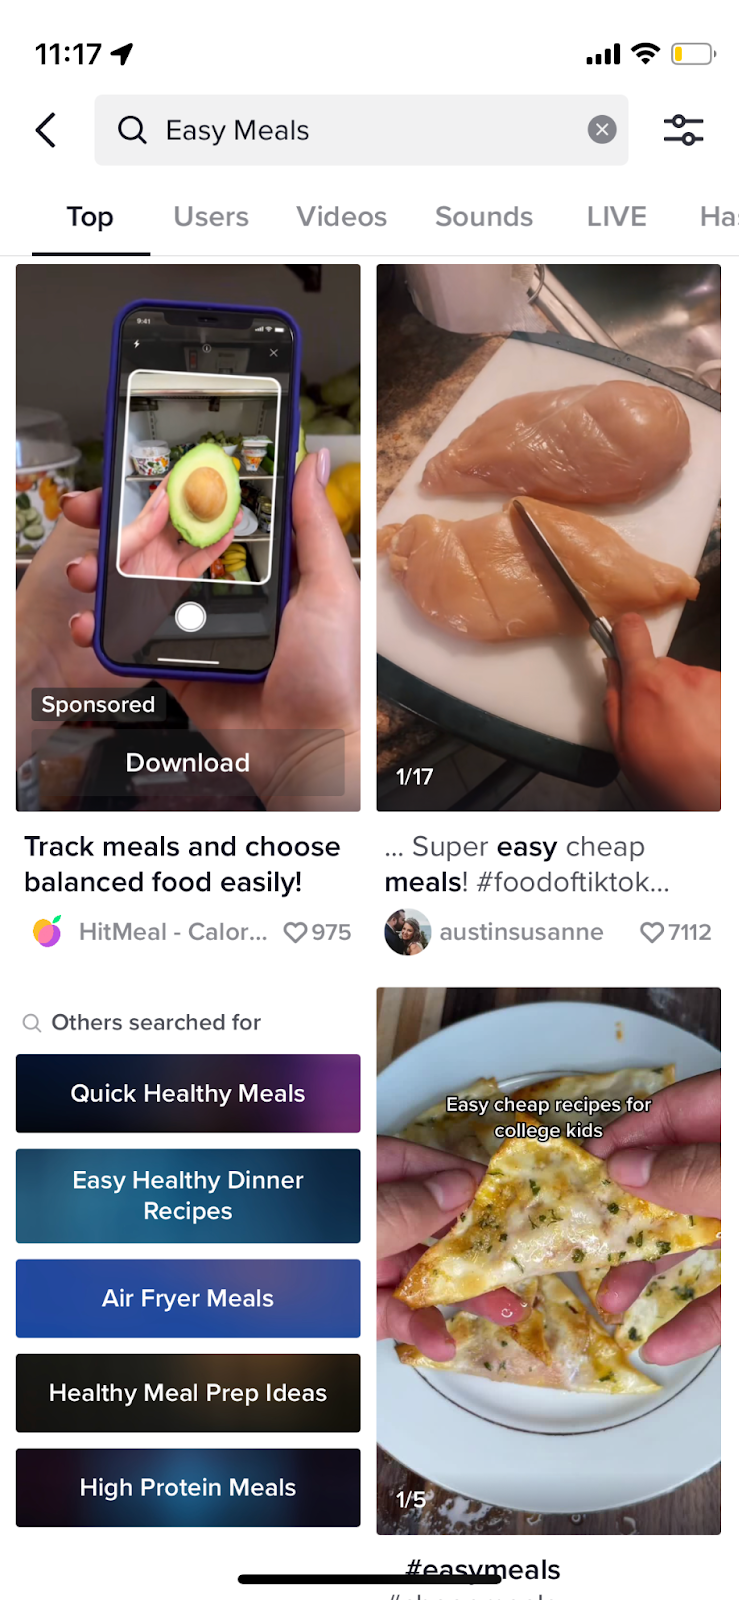 Screenshot of TikTok search results for "Easy Meals," which includes a sponsored result.